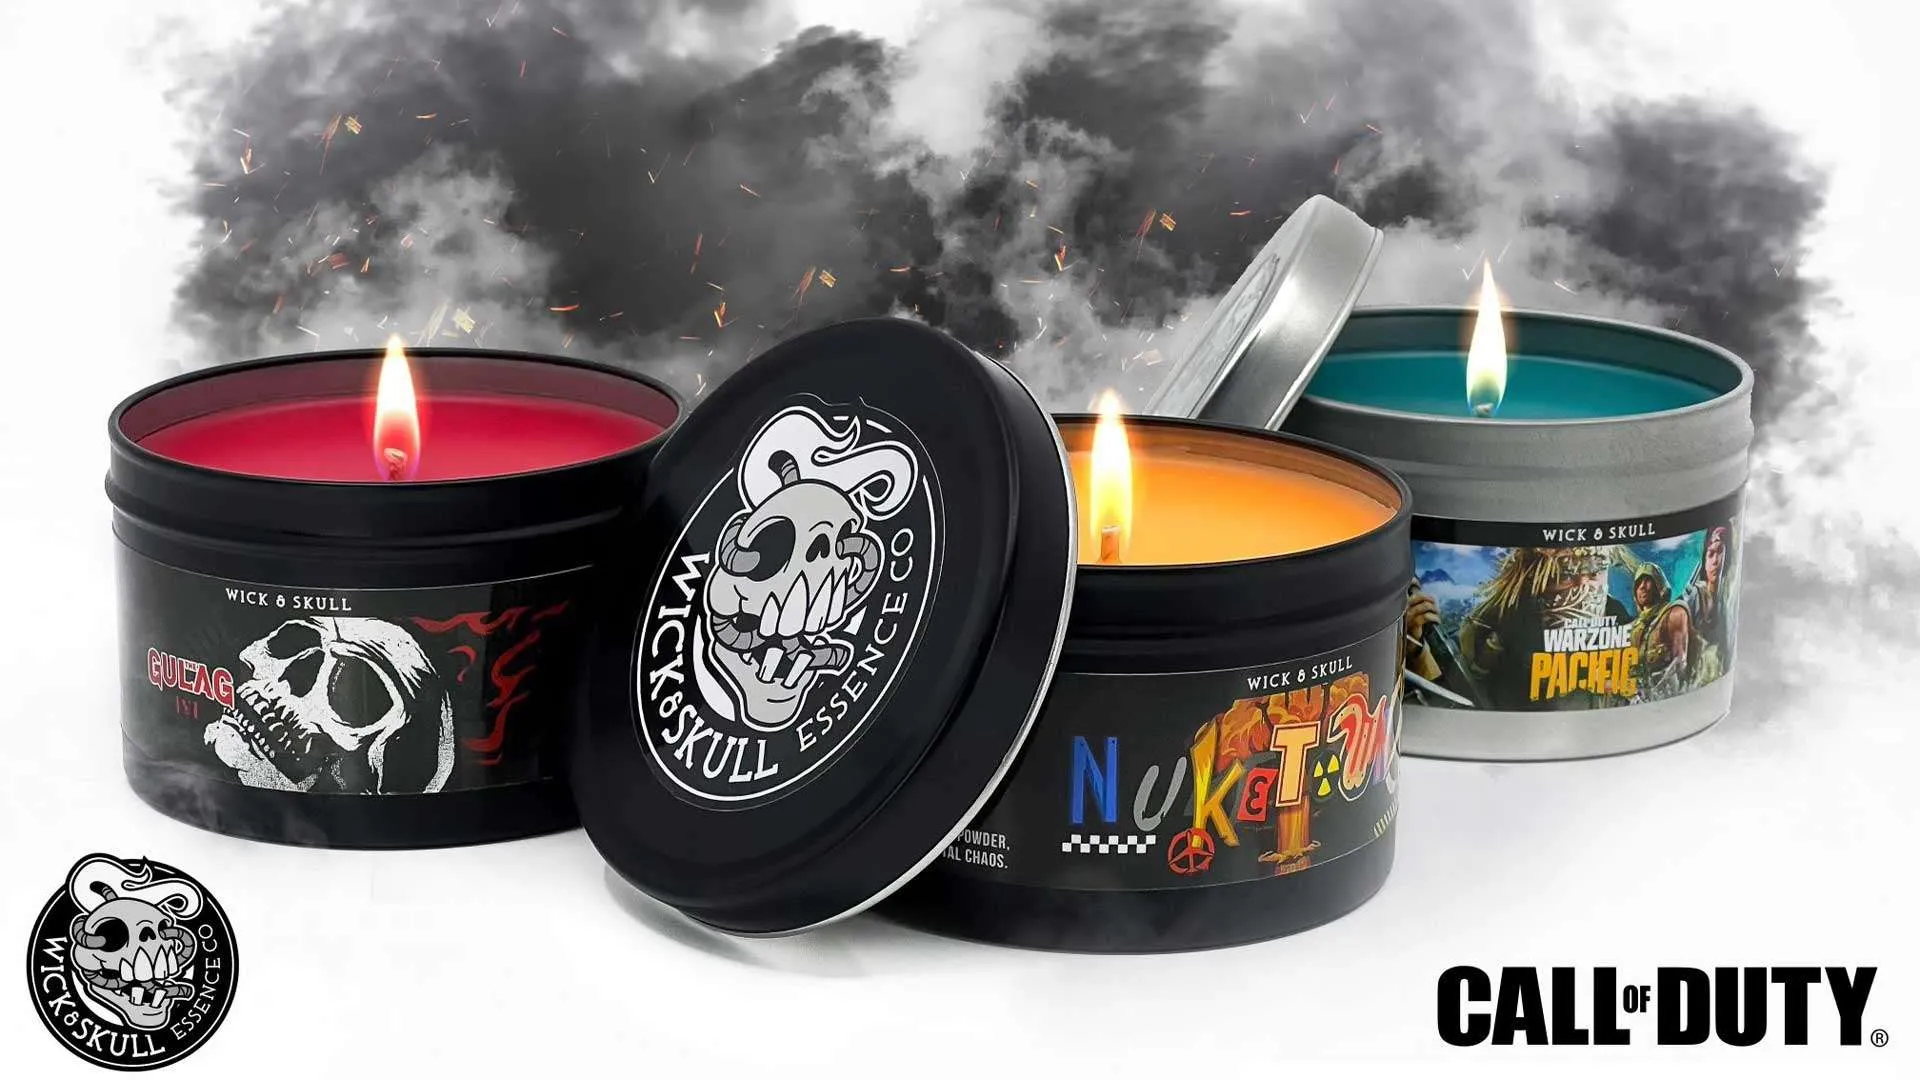 Call of Duty lights up the night with new Wick & Skull candles